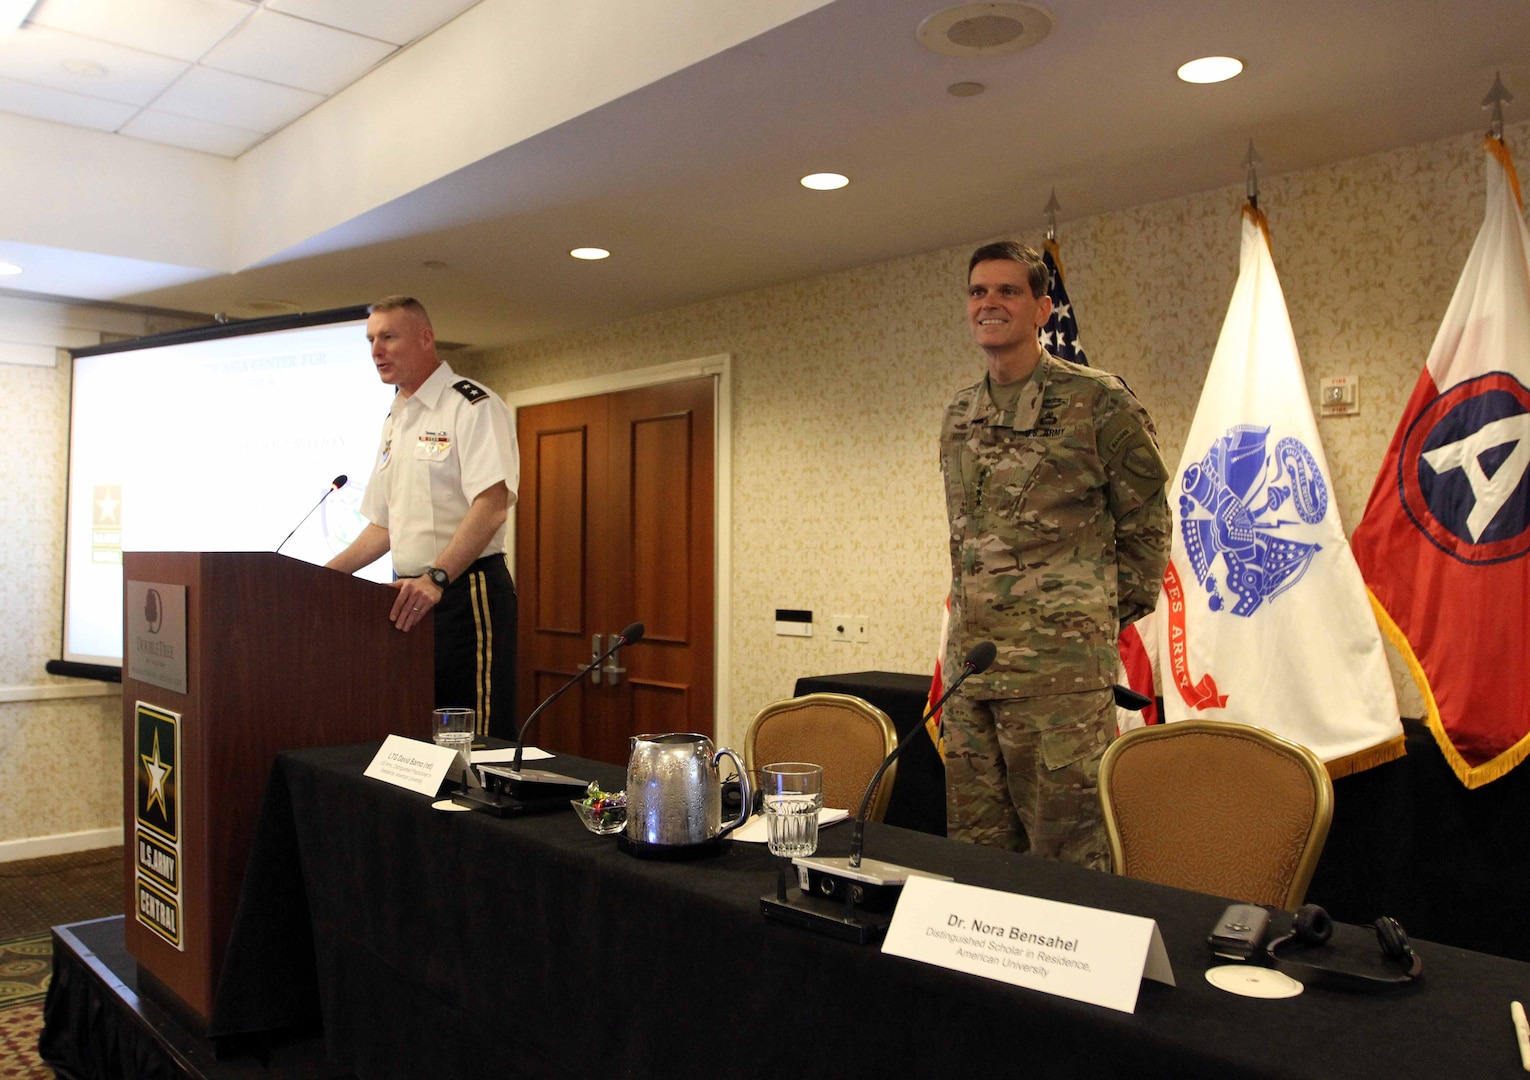 Maj. Gen. Terrence McKenrick, deputy commanding general, U.S. Army Central, introduces Gen. Joseph Votel, commander, U.S. Central Command, to the participants of the USARCENT CASA Land Forces Symposium in Alexandria, Va., June 19-22, 2017. The symposium gave senior leaders of USARCENT an op-portunity to hear from civilian and military experts on the Middle East and Cen-tral and South Asia, such as Votel. (U.S. Army photo by Sgt. Matt Kuzara)